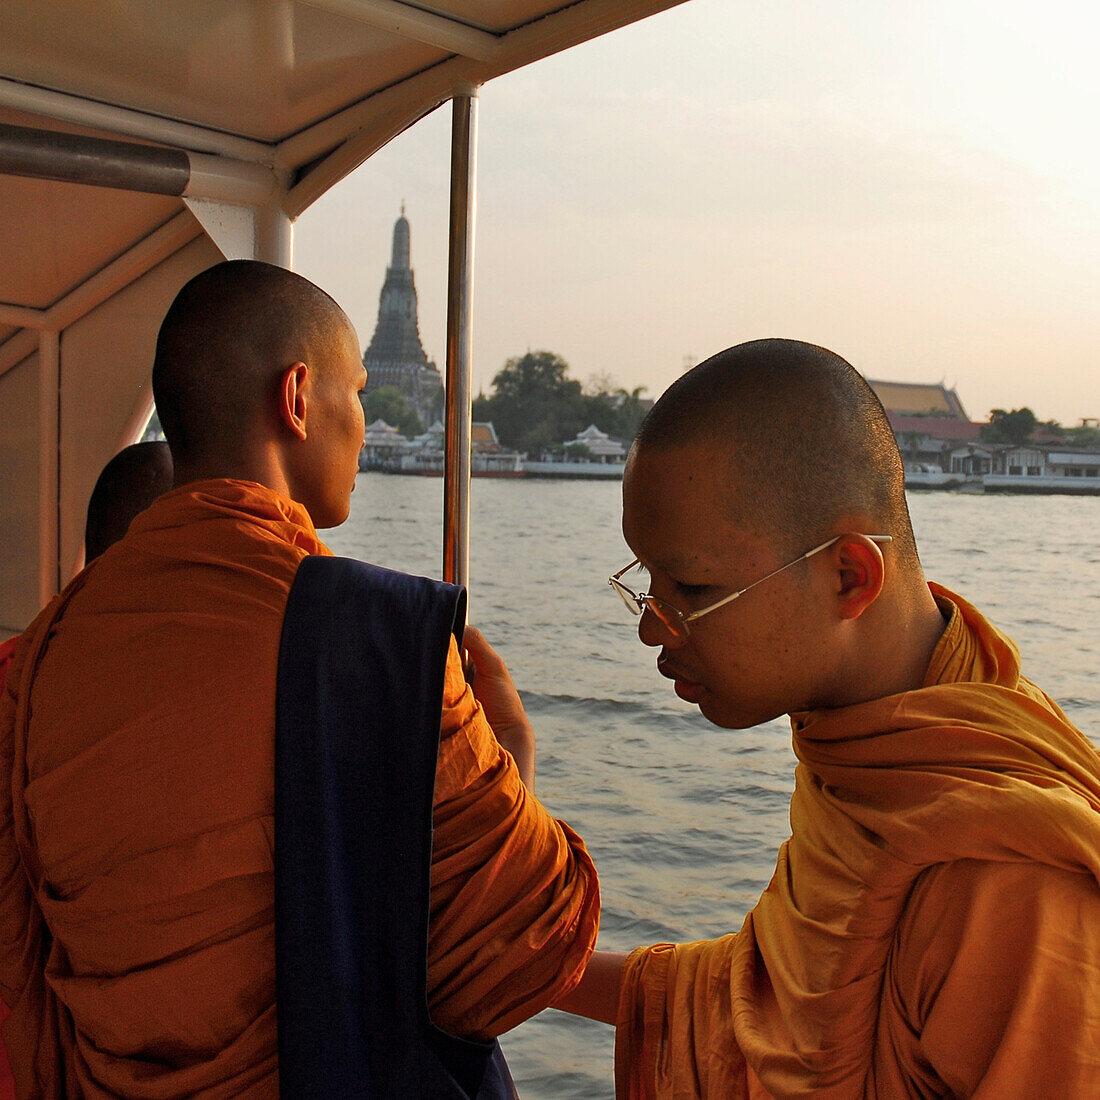 Monks on ferry in front of Wat Arun, Bangkok, Thailand, Asia